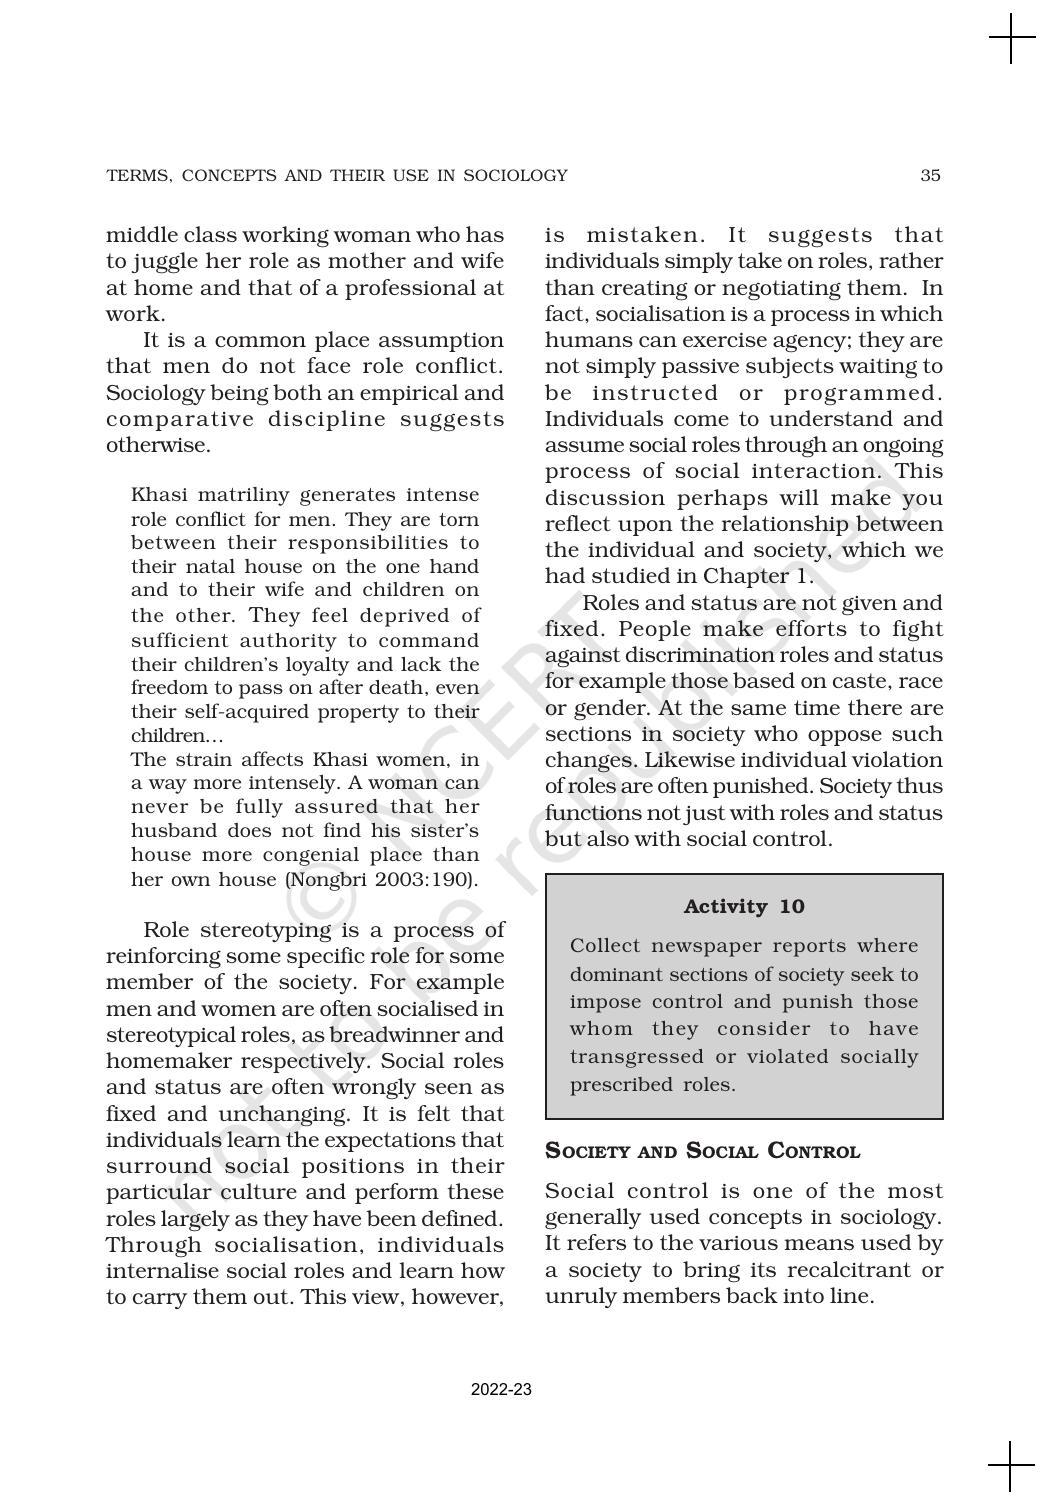 NCERT Book for Class 11 Sociology (Part-I) Chapter 2 Terms, Concepts and Their Use in Sociology - Page 12